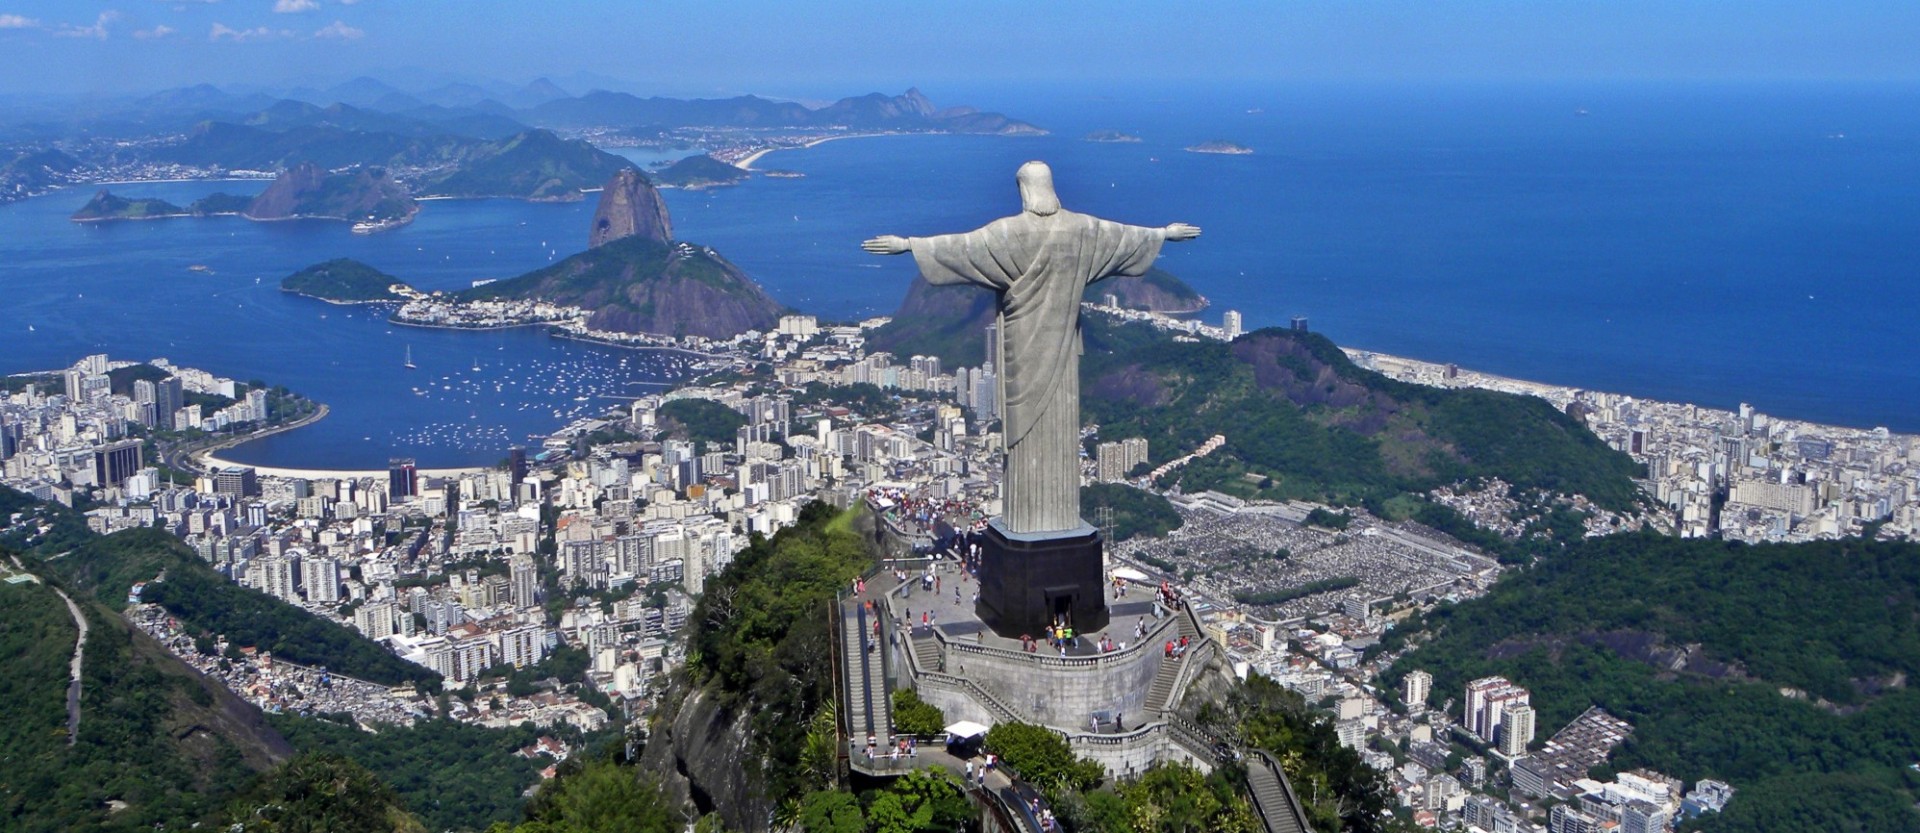 "Christ the Redeemer" atop the Corcovado mountain overlooking the city of Rio de Janeiro, Brazil. Source: Artyominc on Wikimedia Commons, CC BY-SA 3.0.